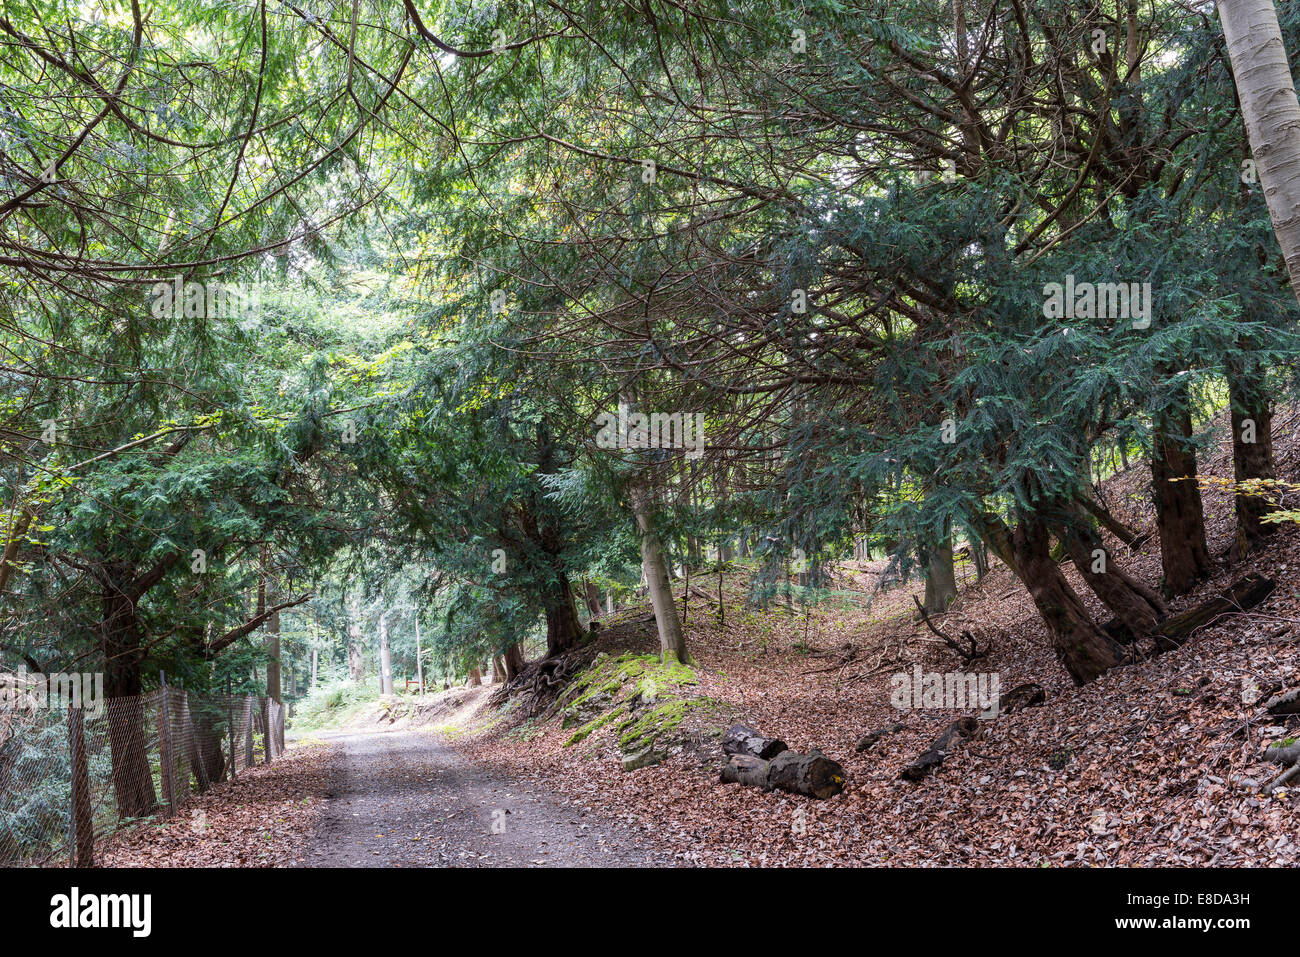 Ibengarten nature reserve, Common yew (Taxus baccata), Biosphere Reserve Rhön, Dermbach, Thuringia, Germany Stock Photo